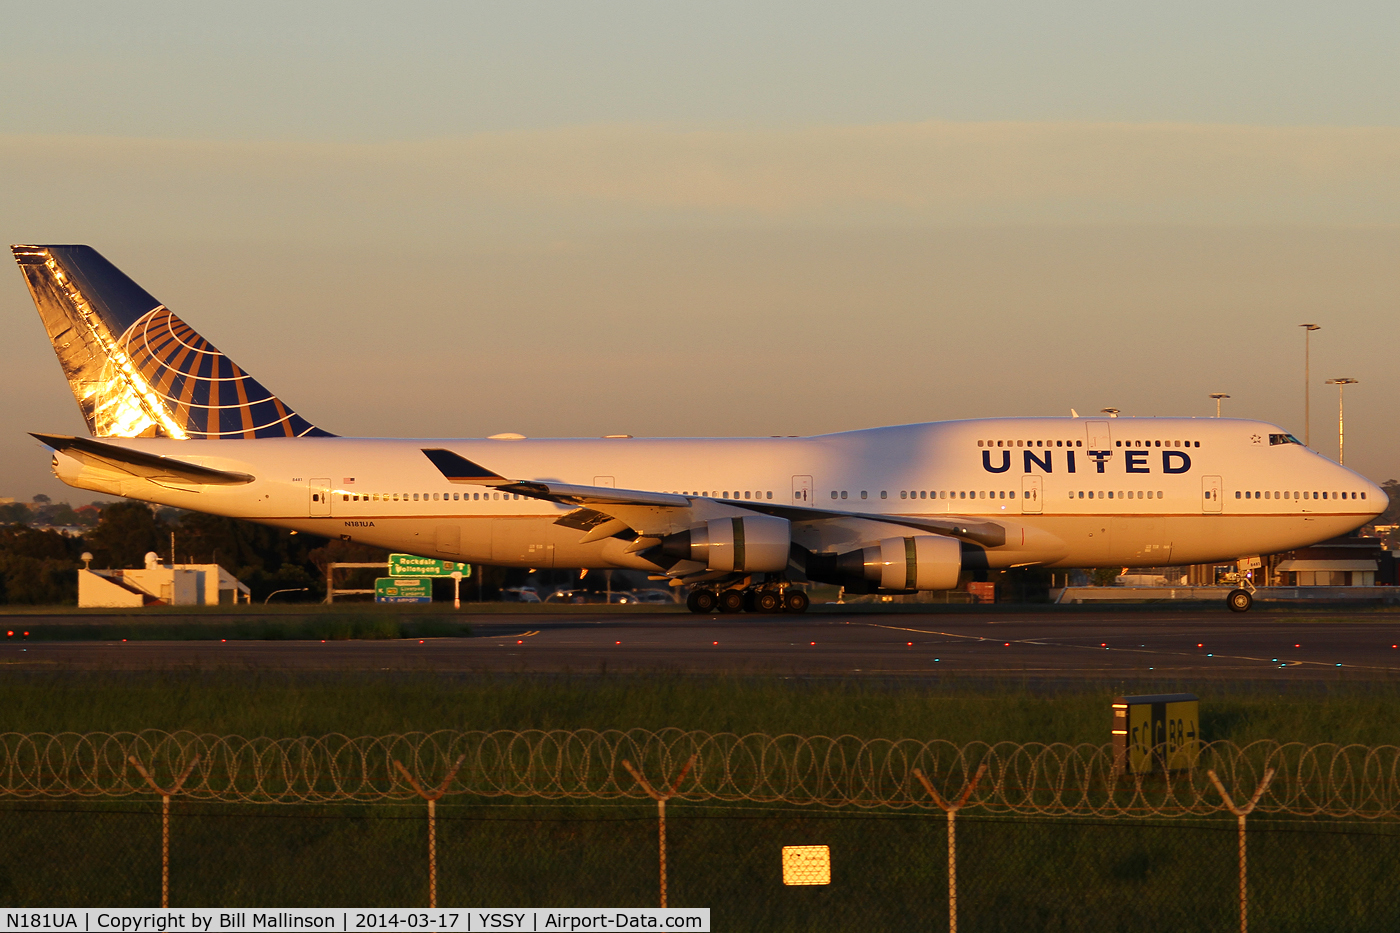 N181UA, 1991 Boeing 747-422 C/N 25278, just in from LAX